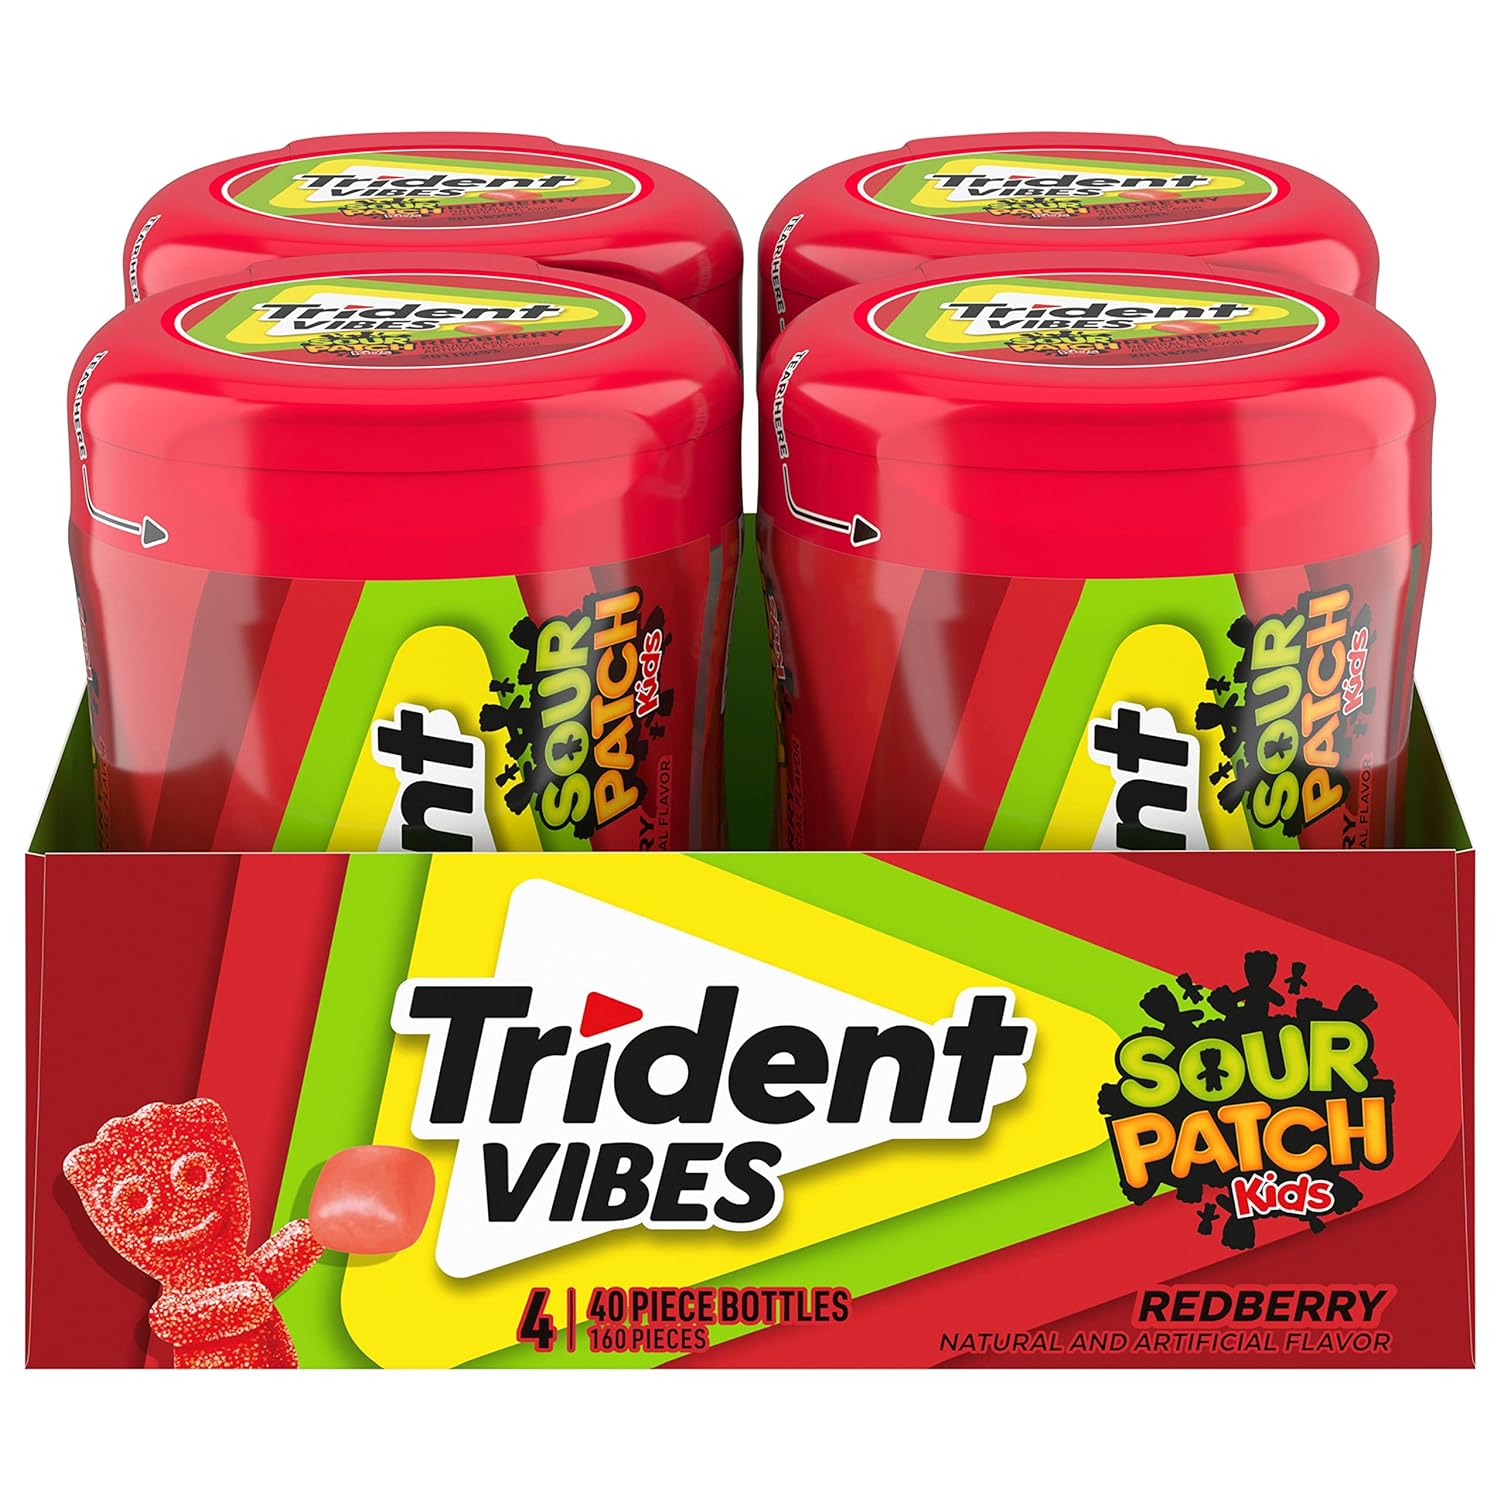 4-Pack 40-Pieces Trident Vibes SOUR PATCH KIDS Redberry Sugar Free Gum (160 Total Pieces) $9.06 w/ S&S + Free Shipping w/ Prime or on $35+